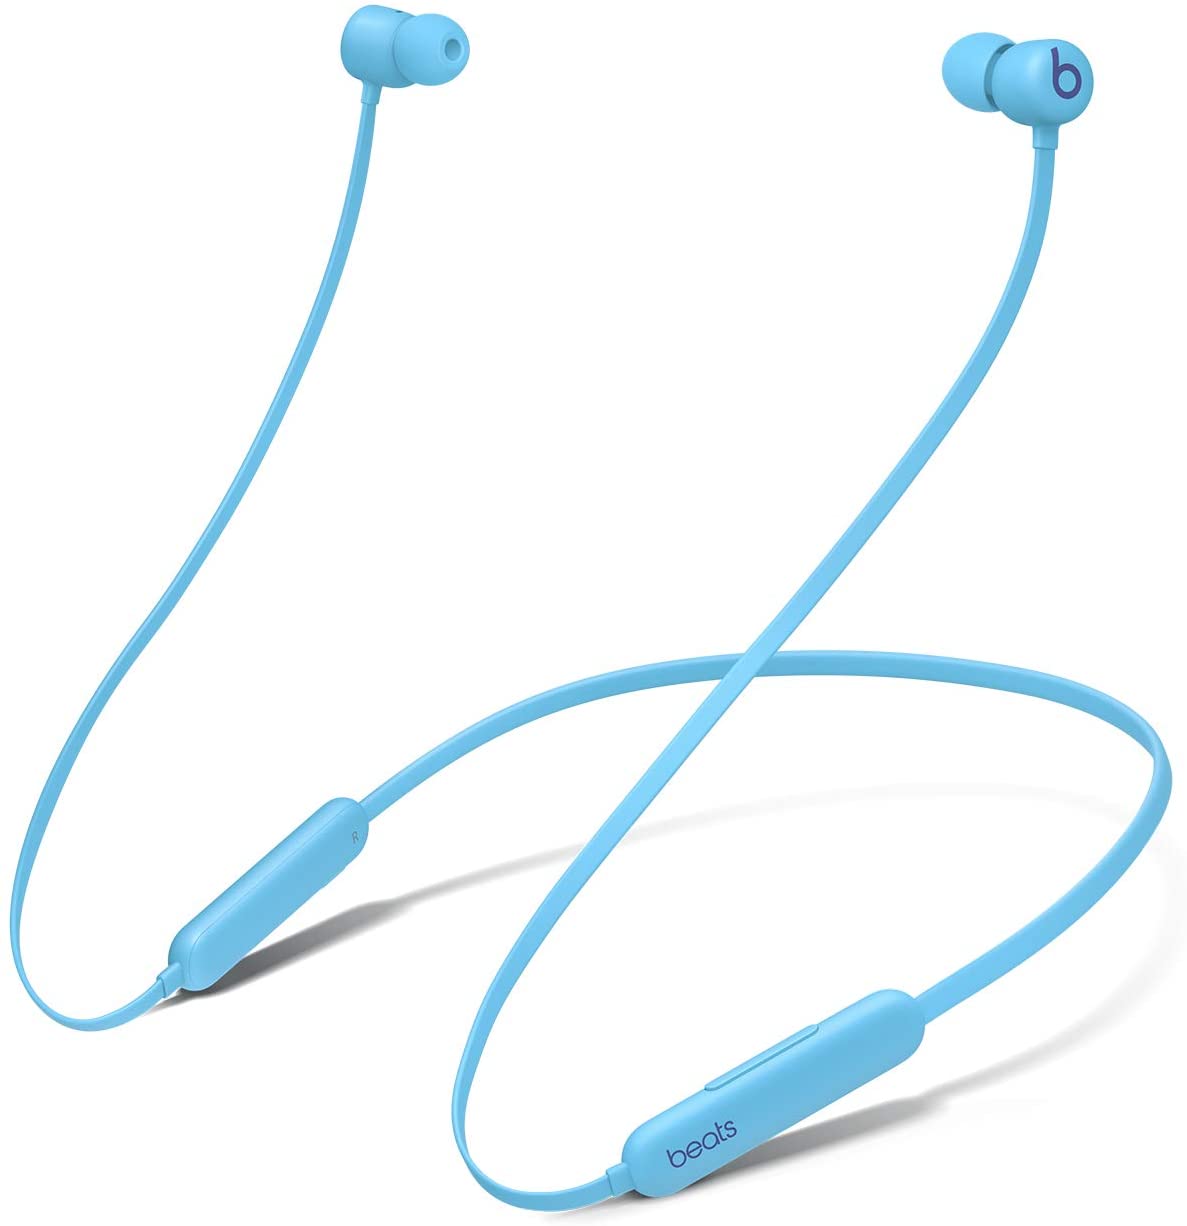 Beats Flex Wireless Earbud Headphones with Built-in Microphone - Flame Blue